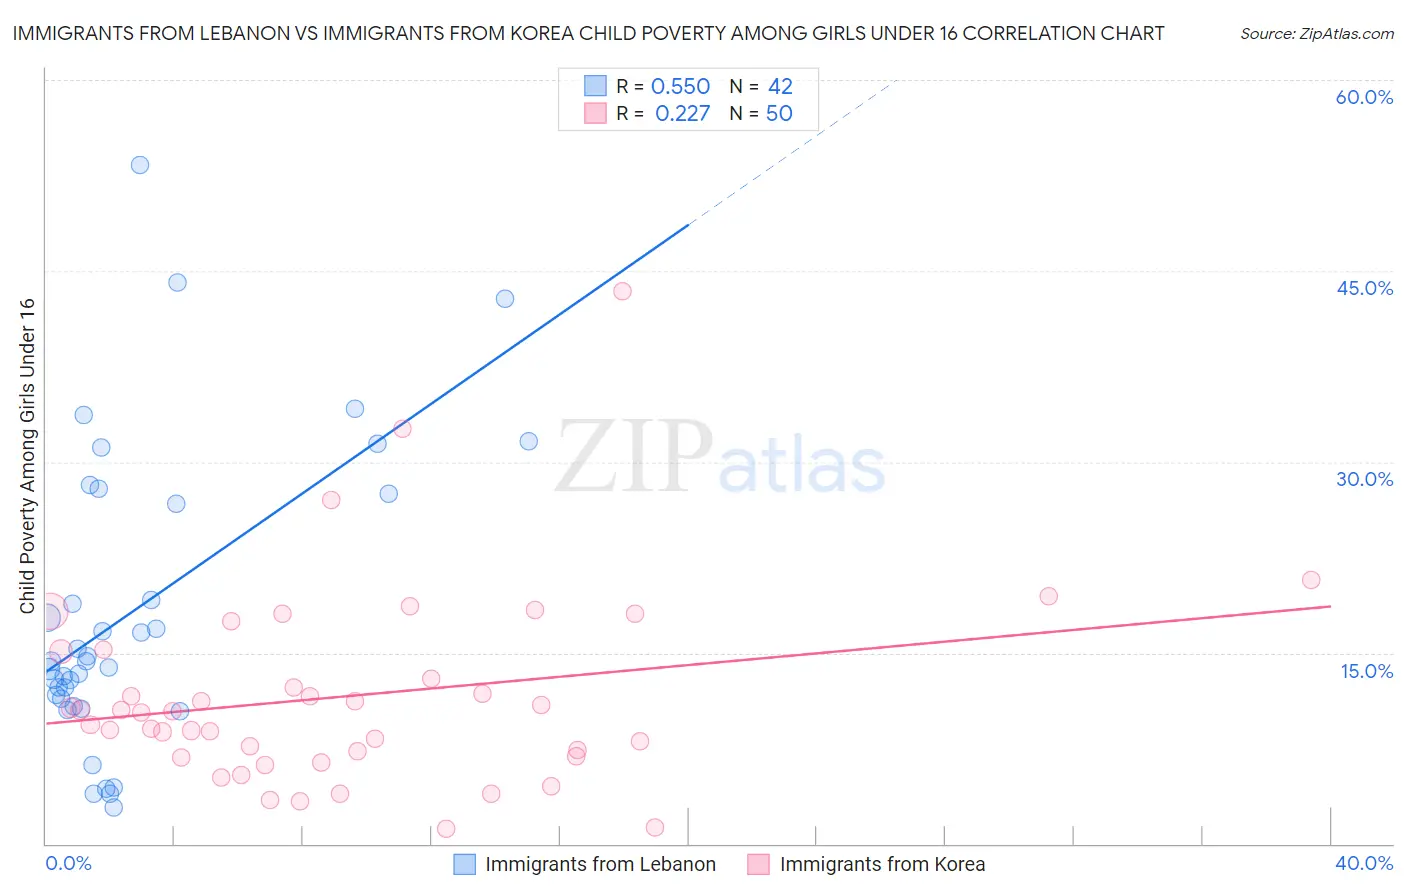 Immigrants from Lebanon vs Immigrants from Korea Child Poverty Among Girls Under 16